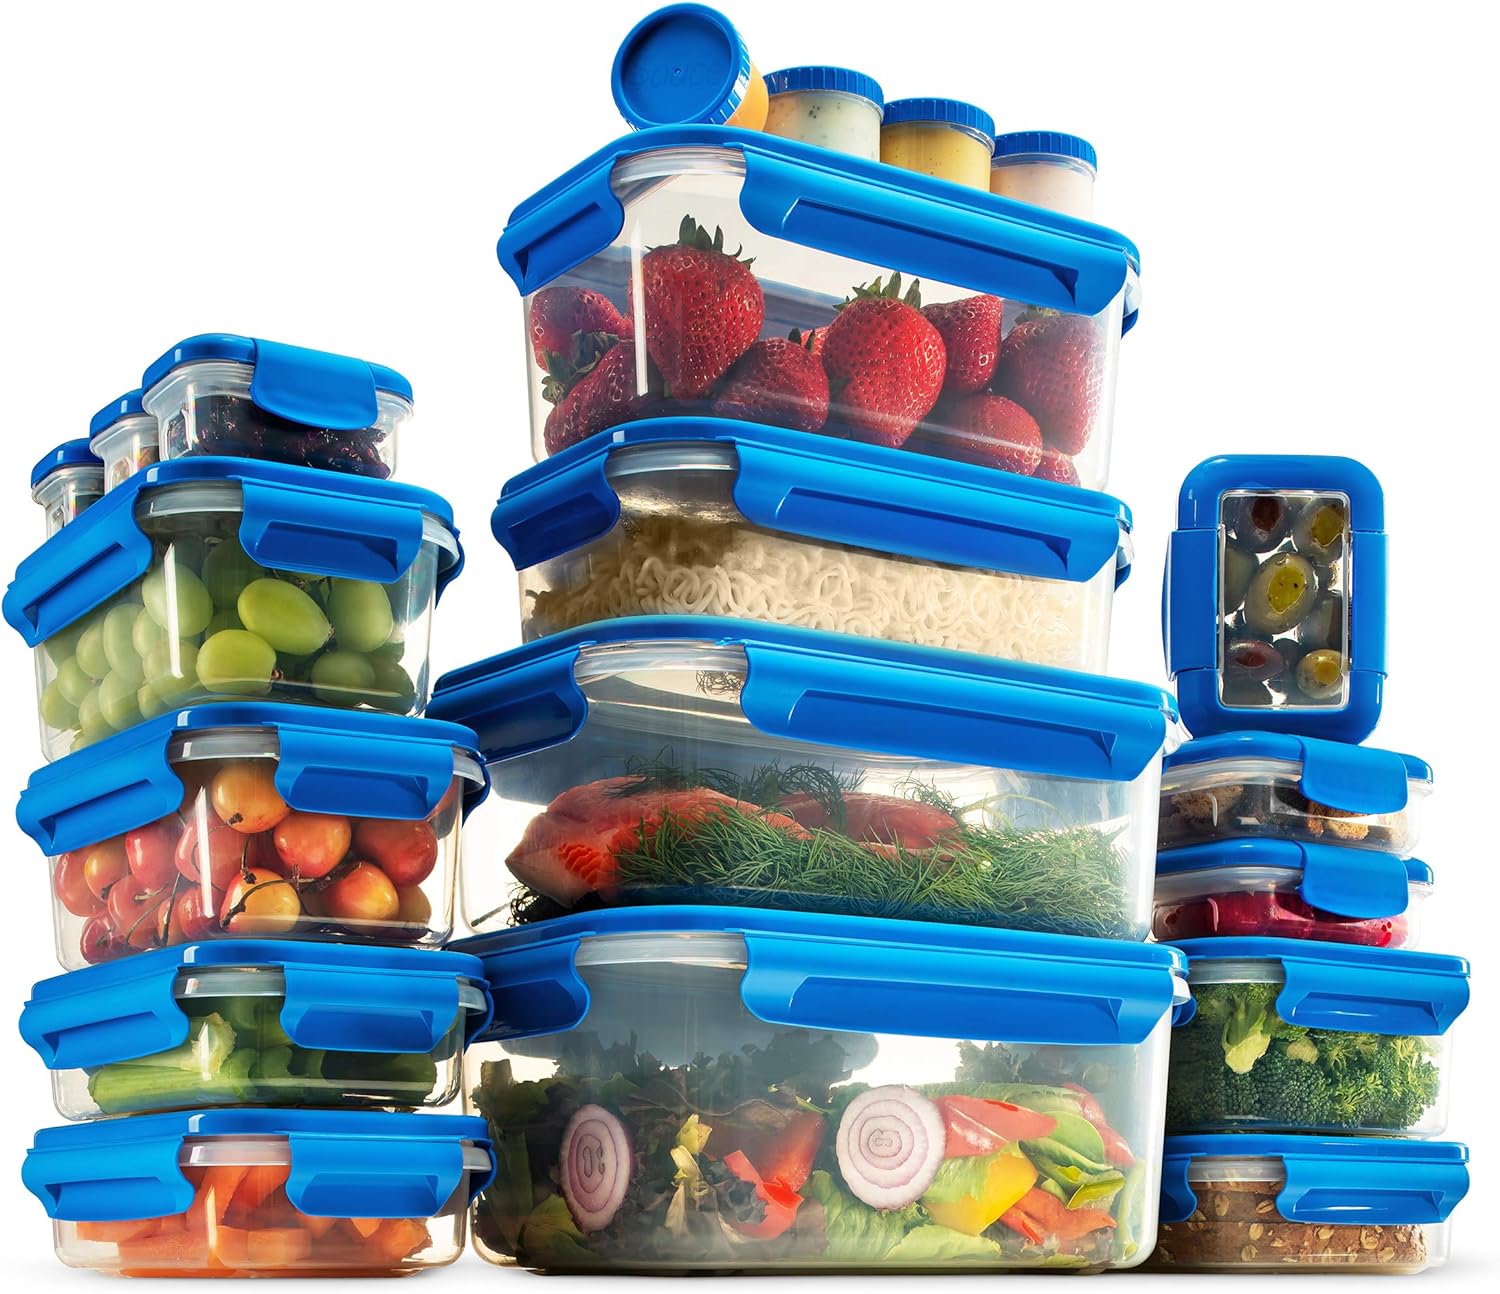 Food Storage Containers With Lids, 40-Piece Airtight Leakproof, BPA-Free Durable Plastic Food Containers for Leftovers - Freezer, Microwave & Dishwasher-Safe (Blue)